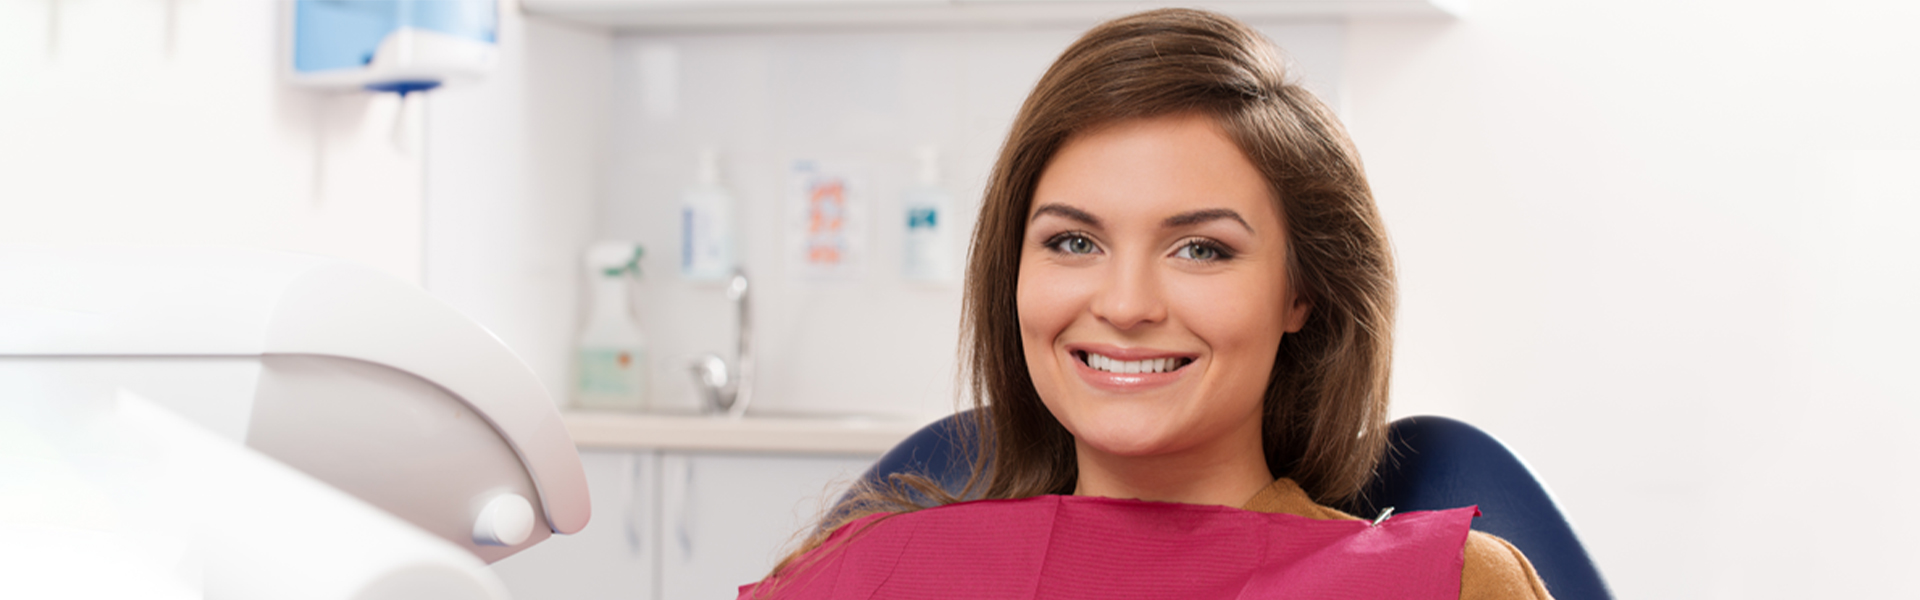 Types and Importance of Restorative Dentistry Options